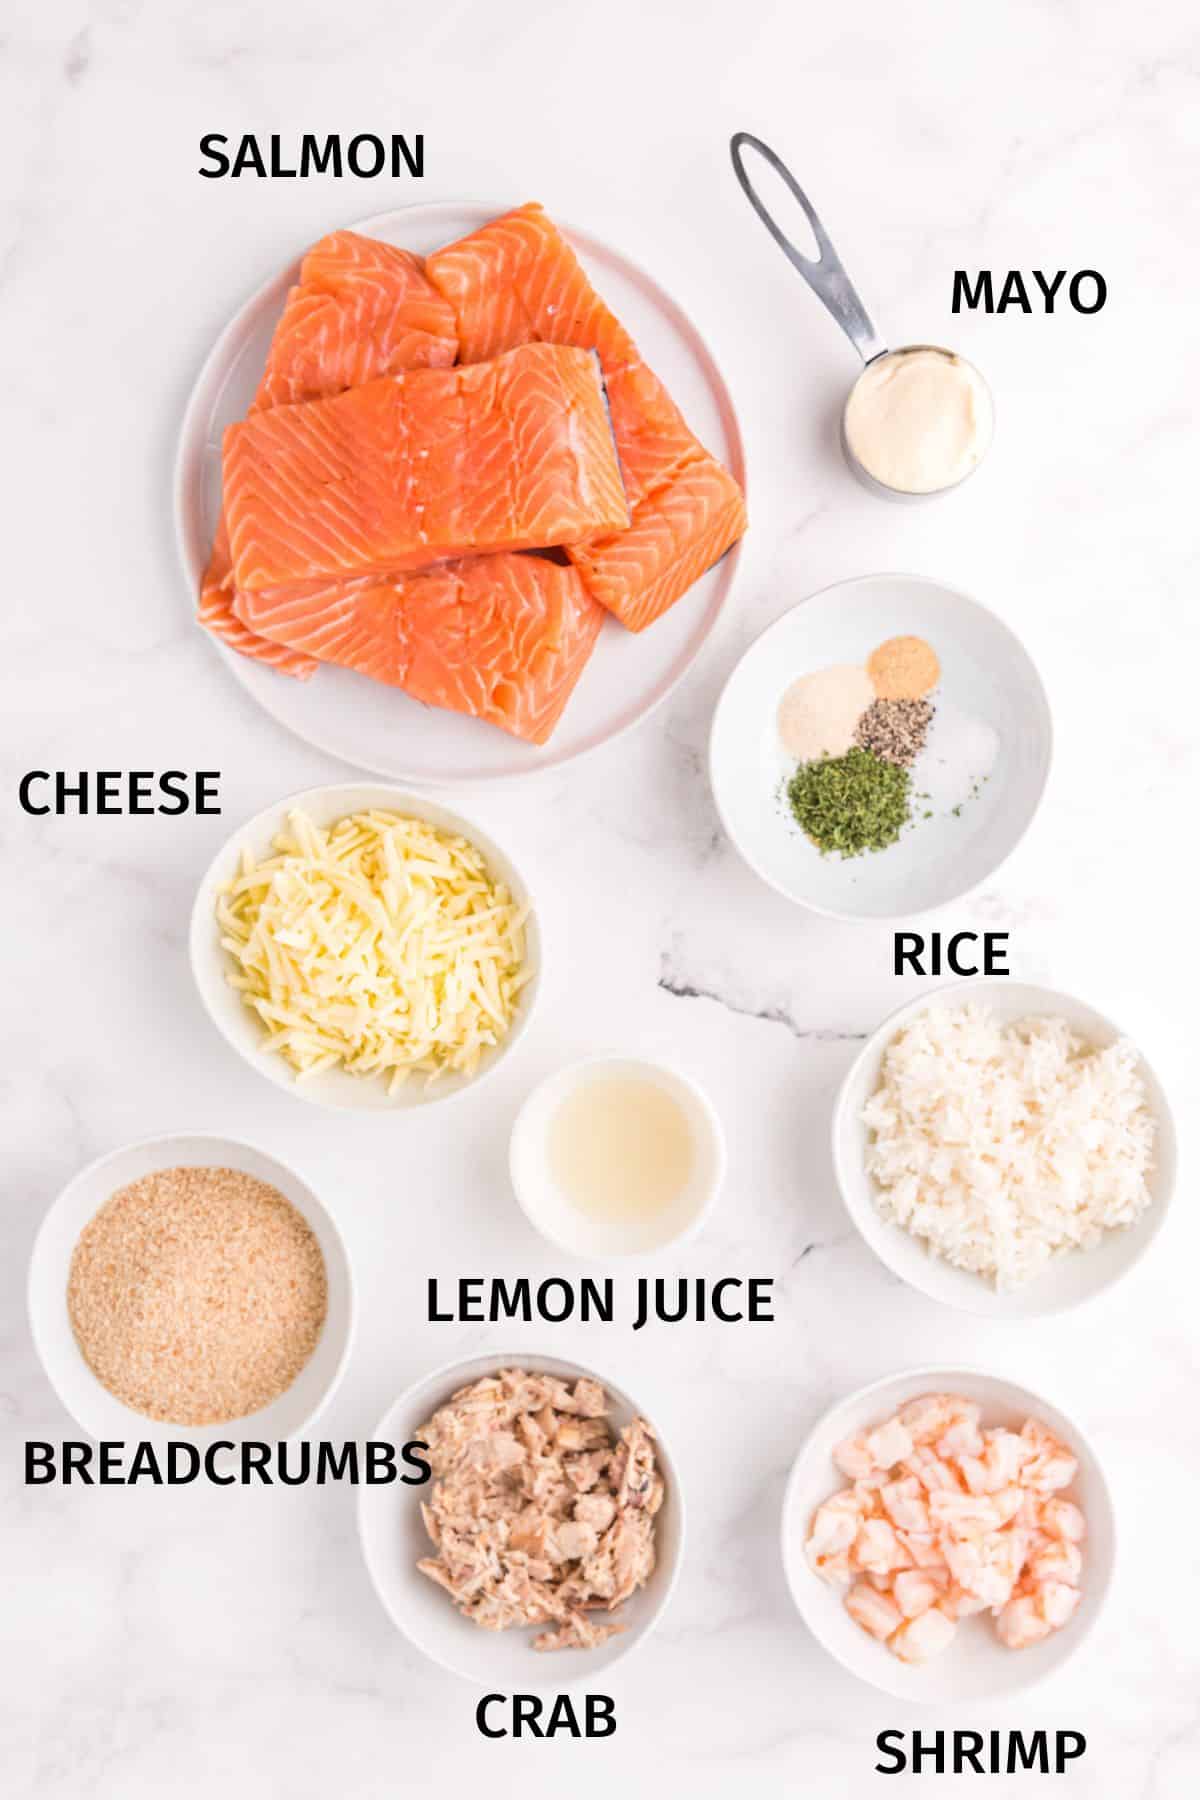 Ingredients to make costco stuffed salmon in small bowls on a white surface.